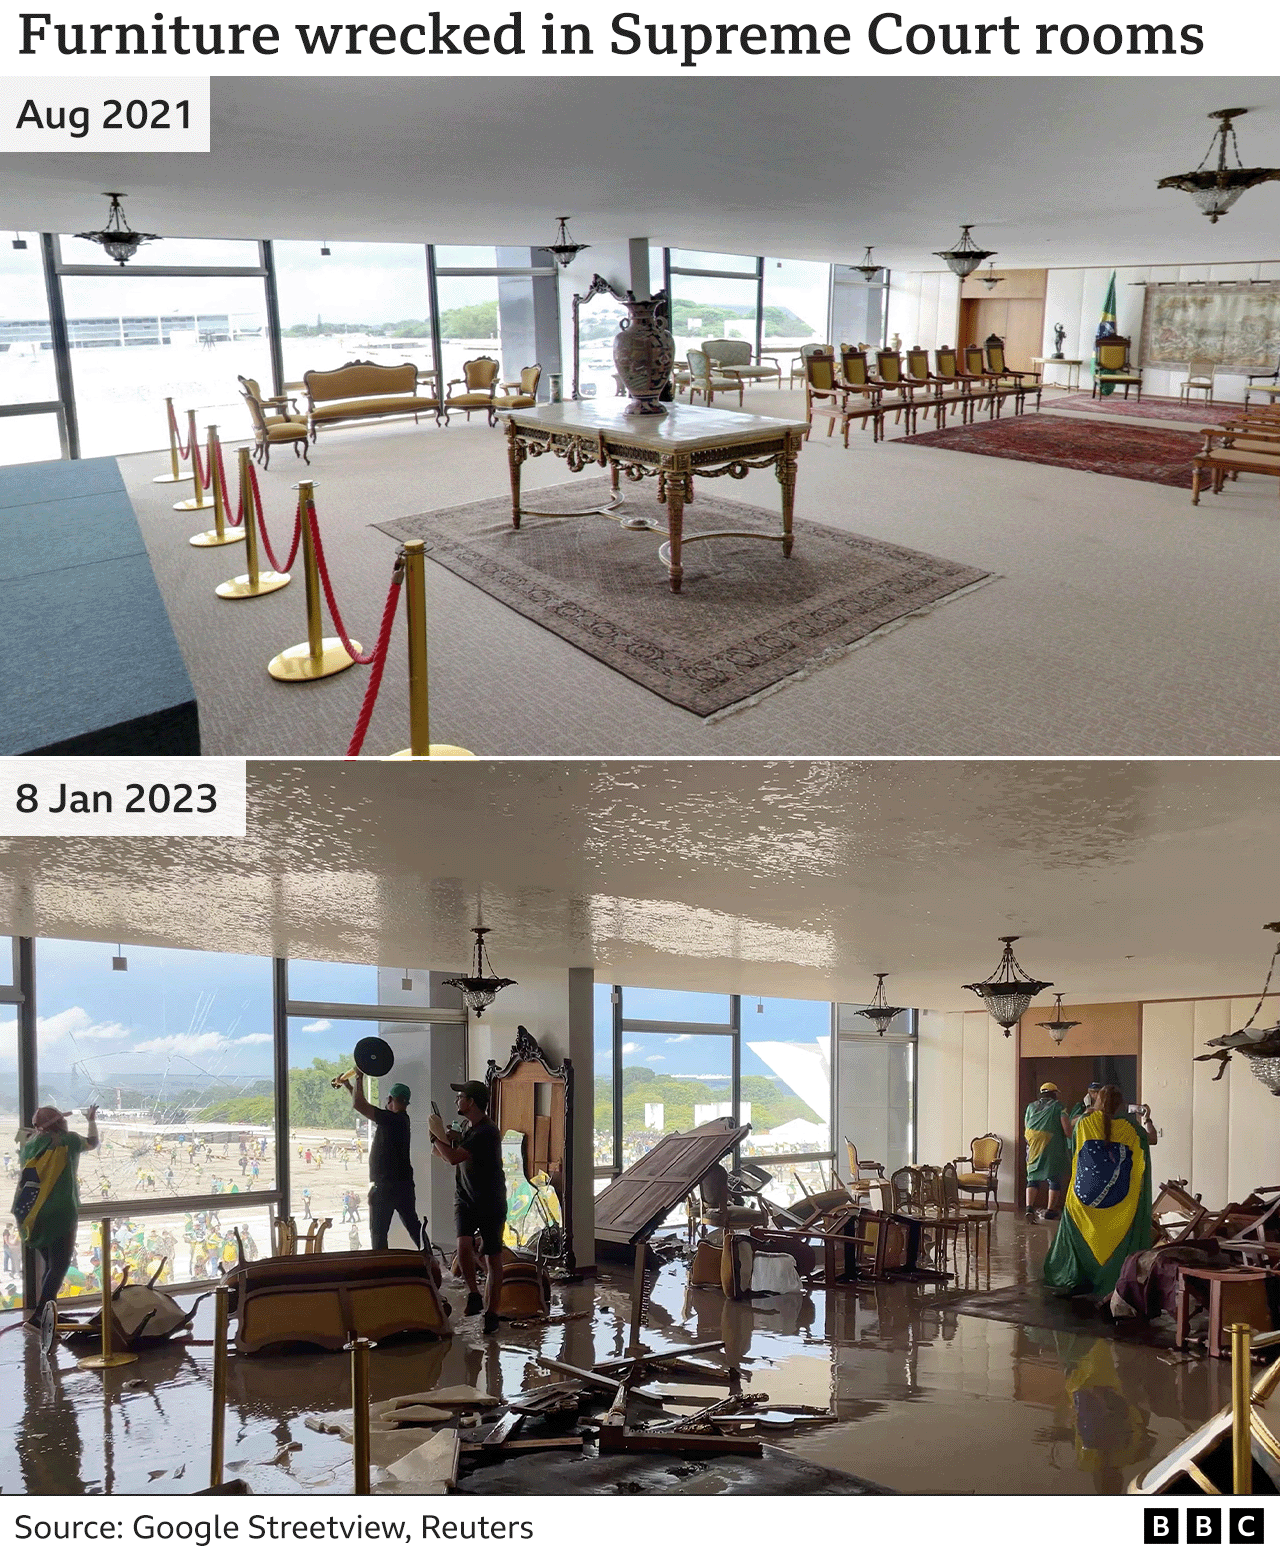 Photos showing rooms in Brazil's Supreme Court before and after the riots